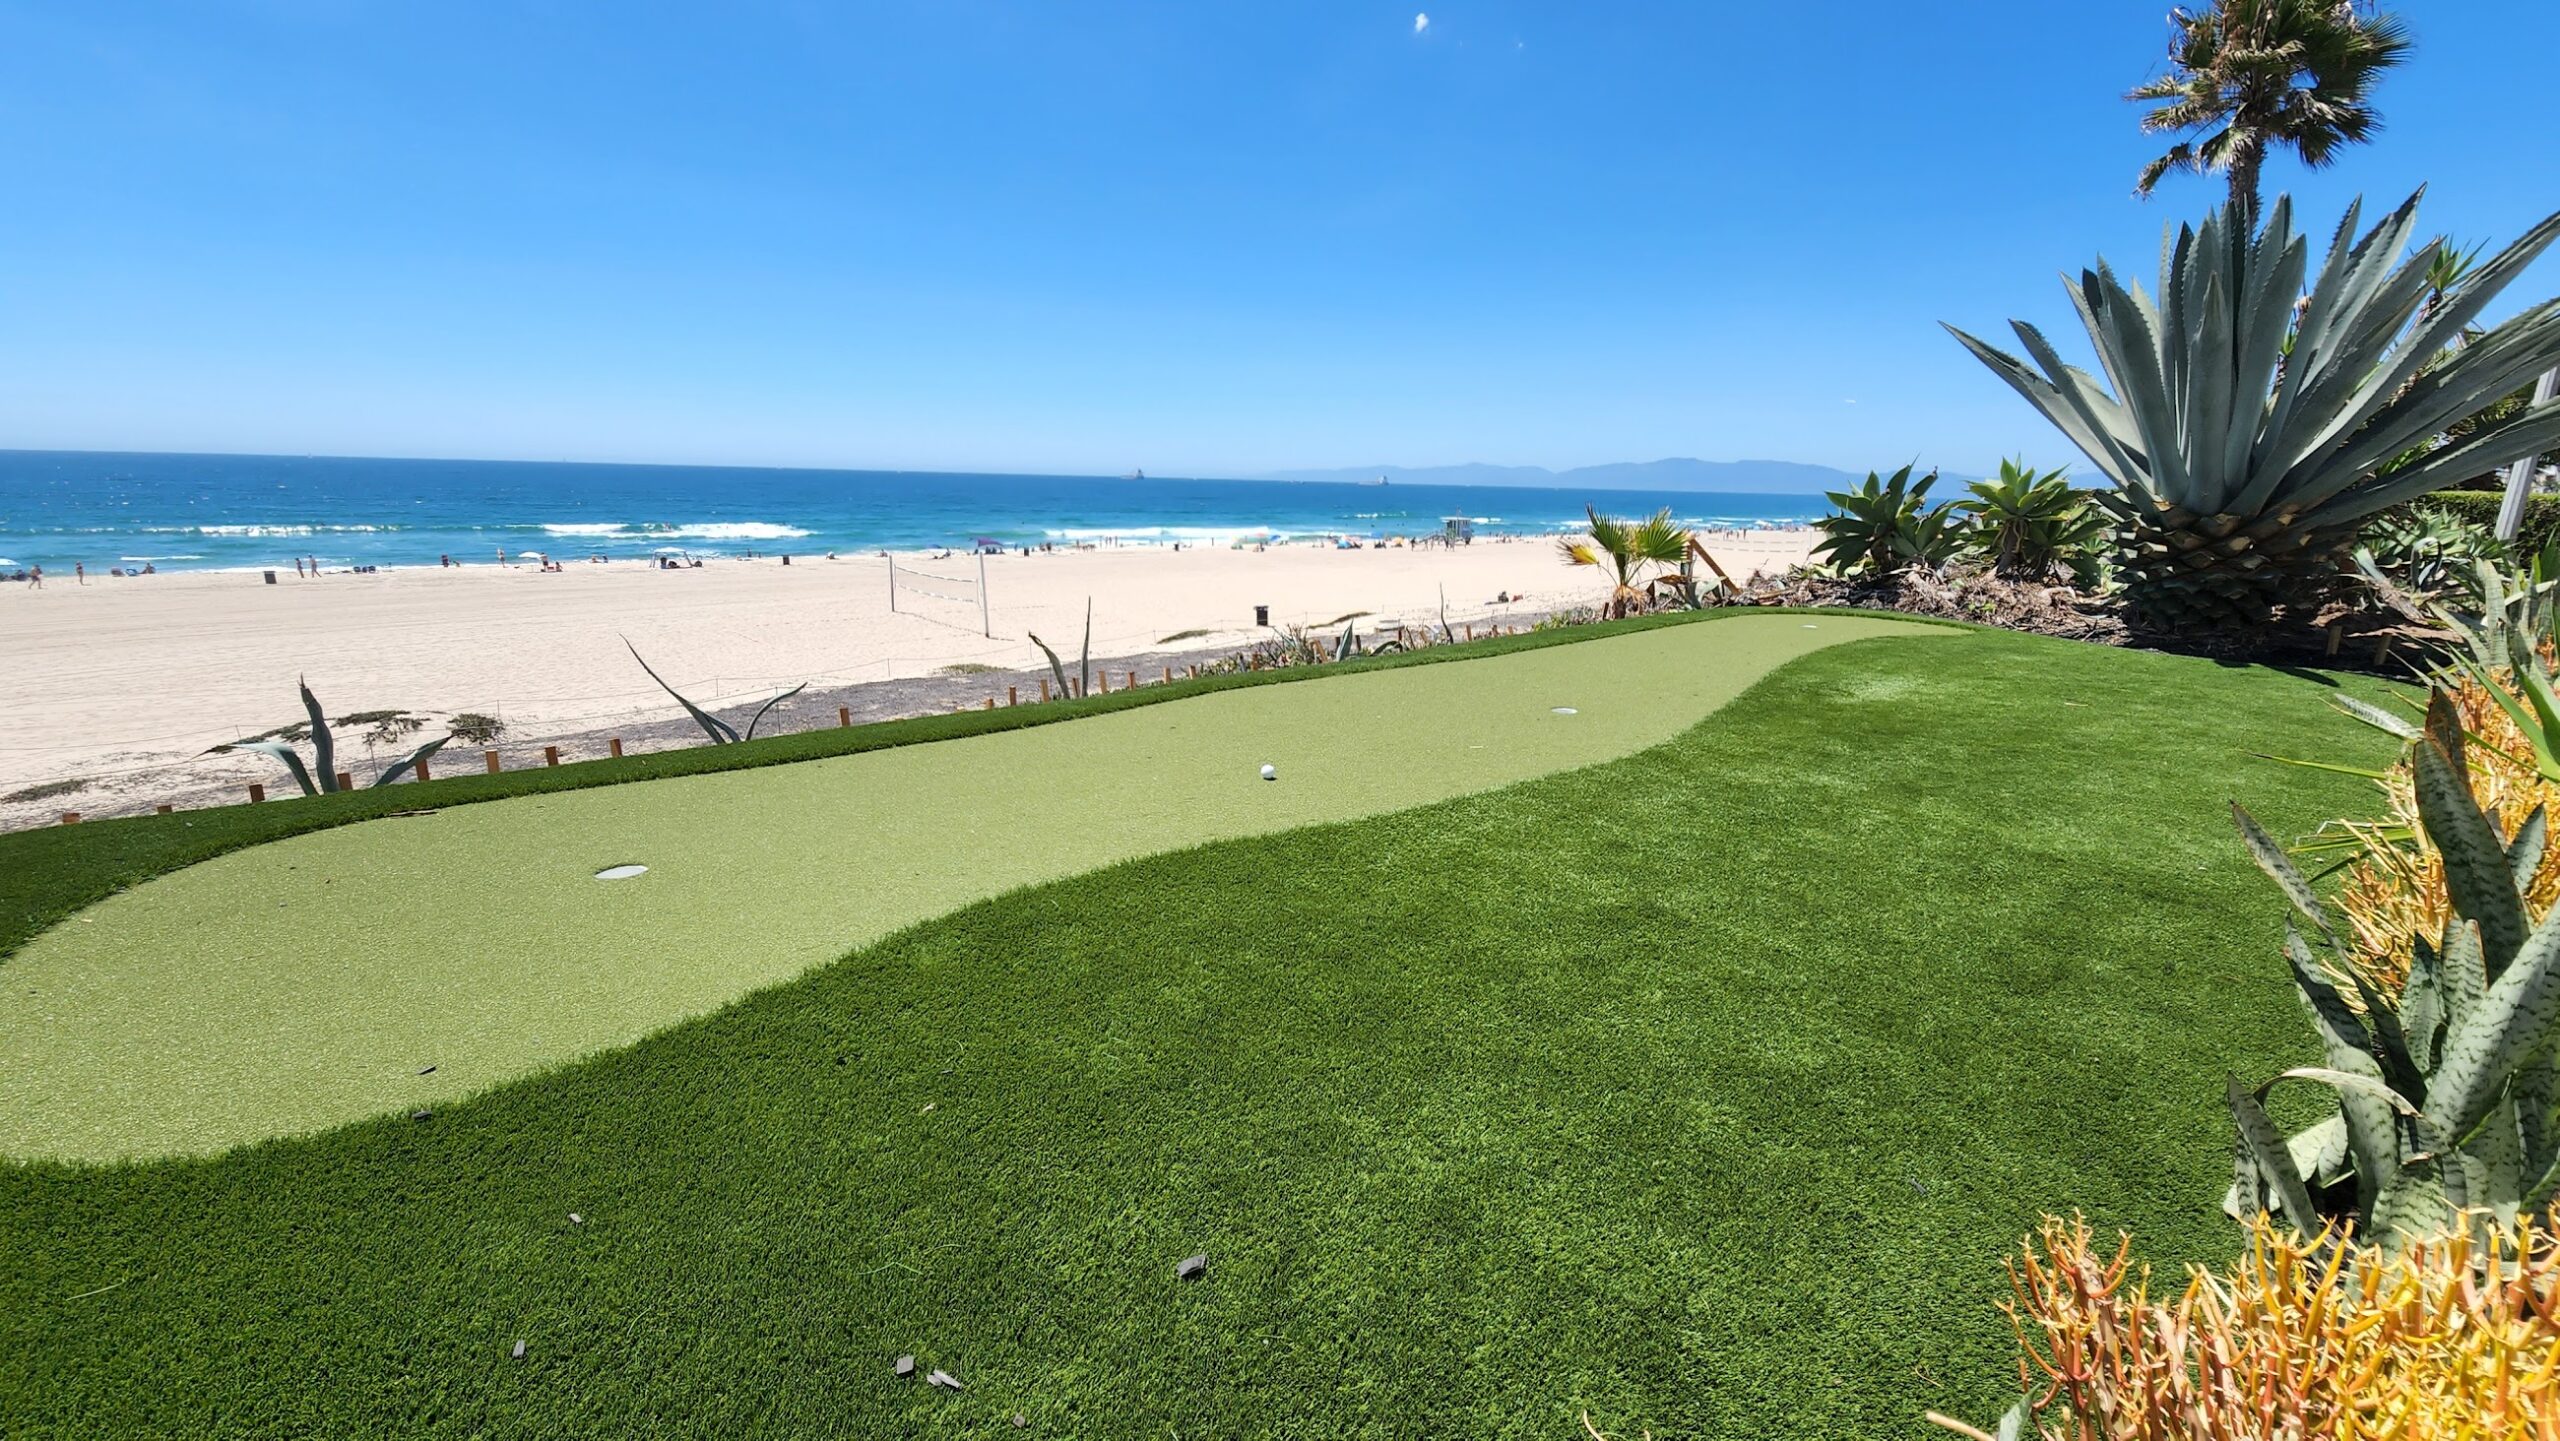 Artificial turf golfing green near the beach in Los Angeles